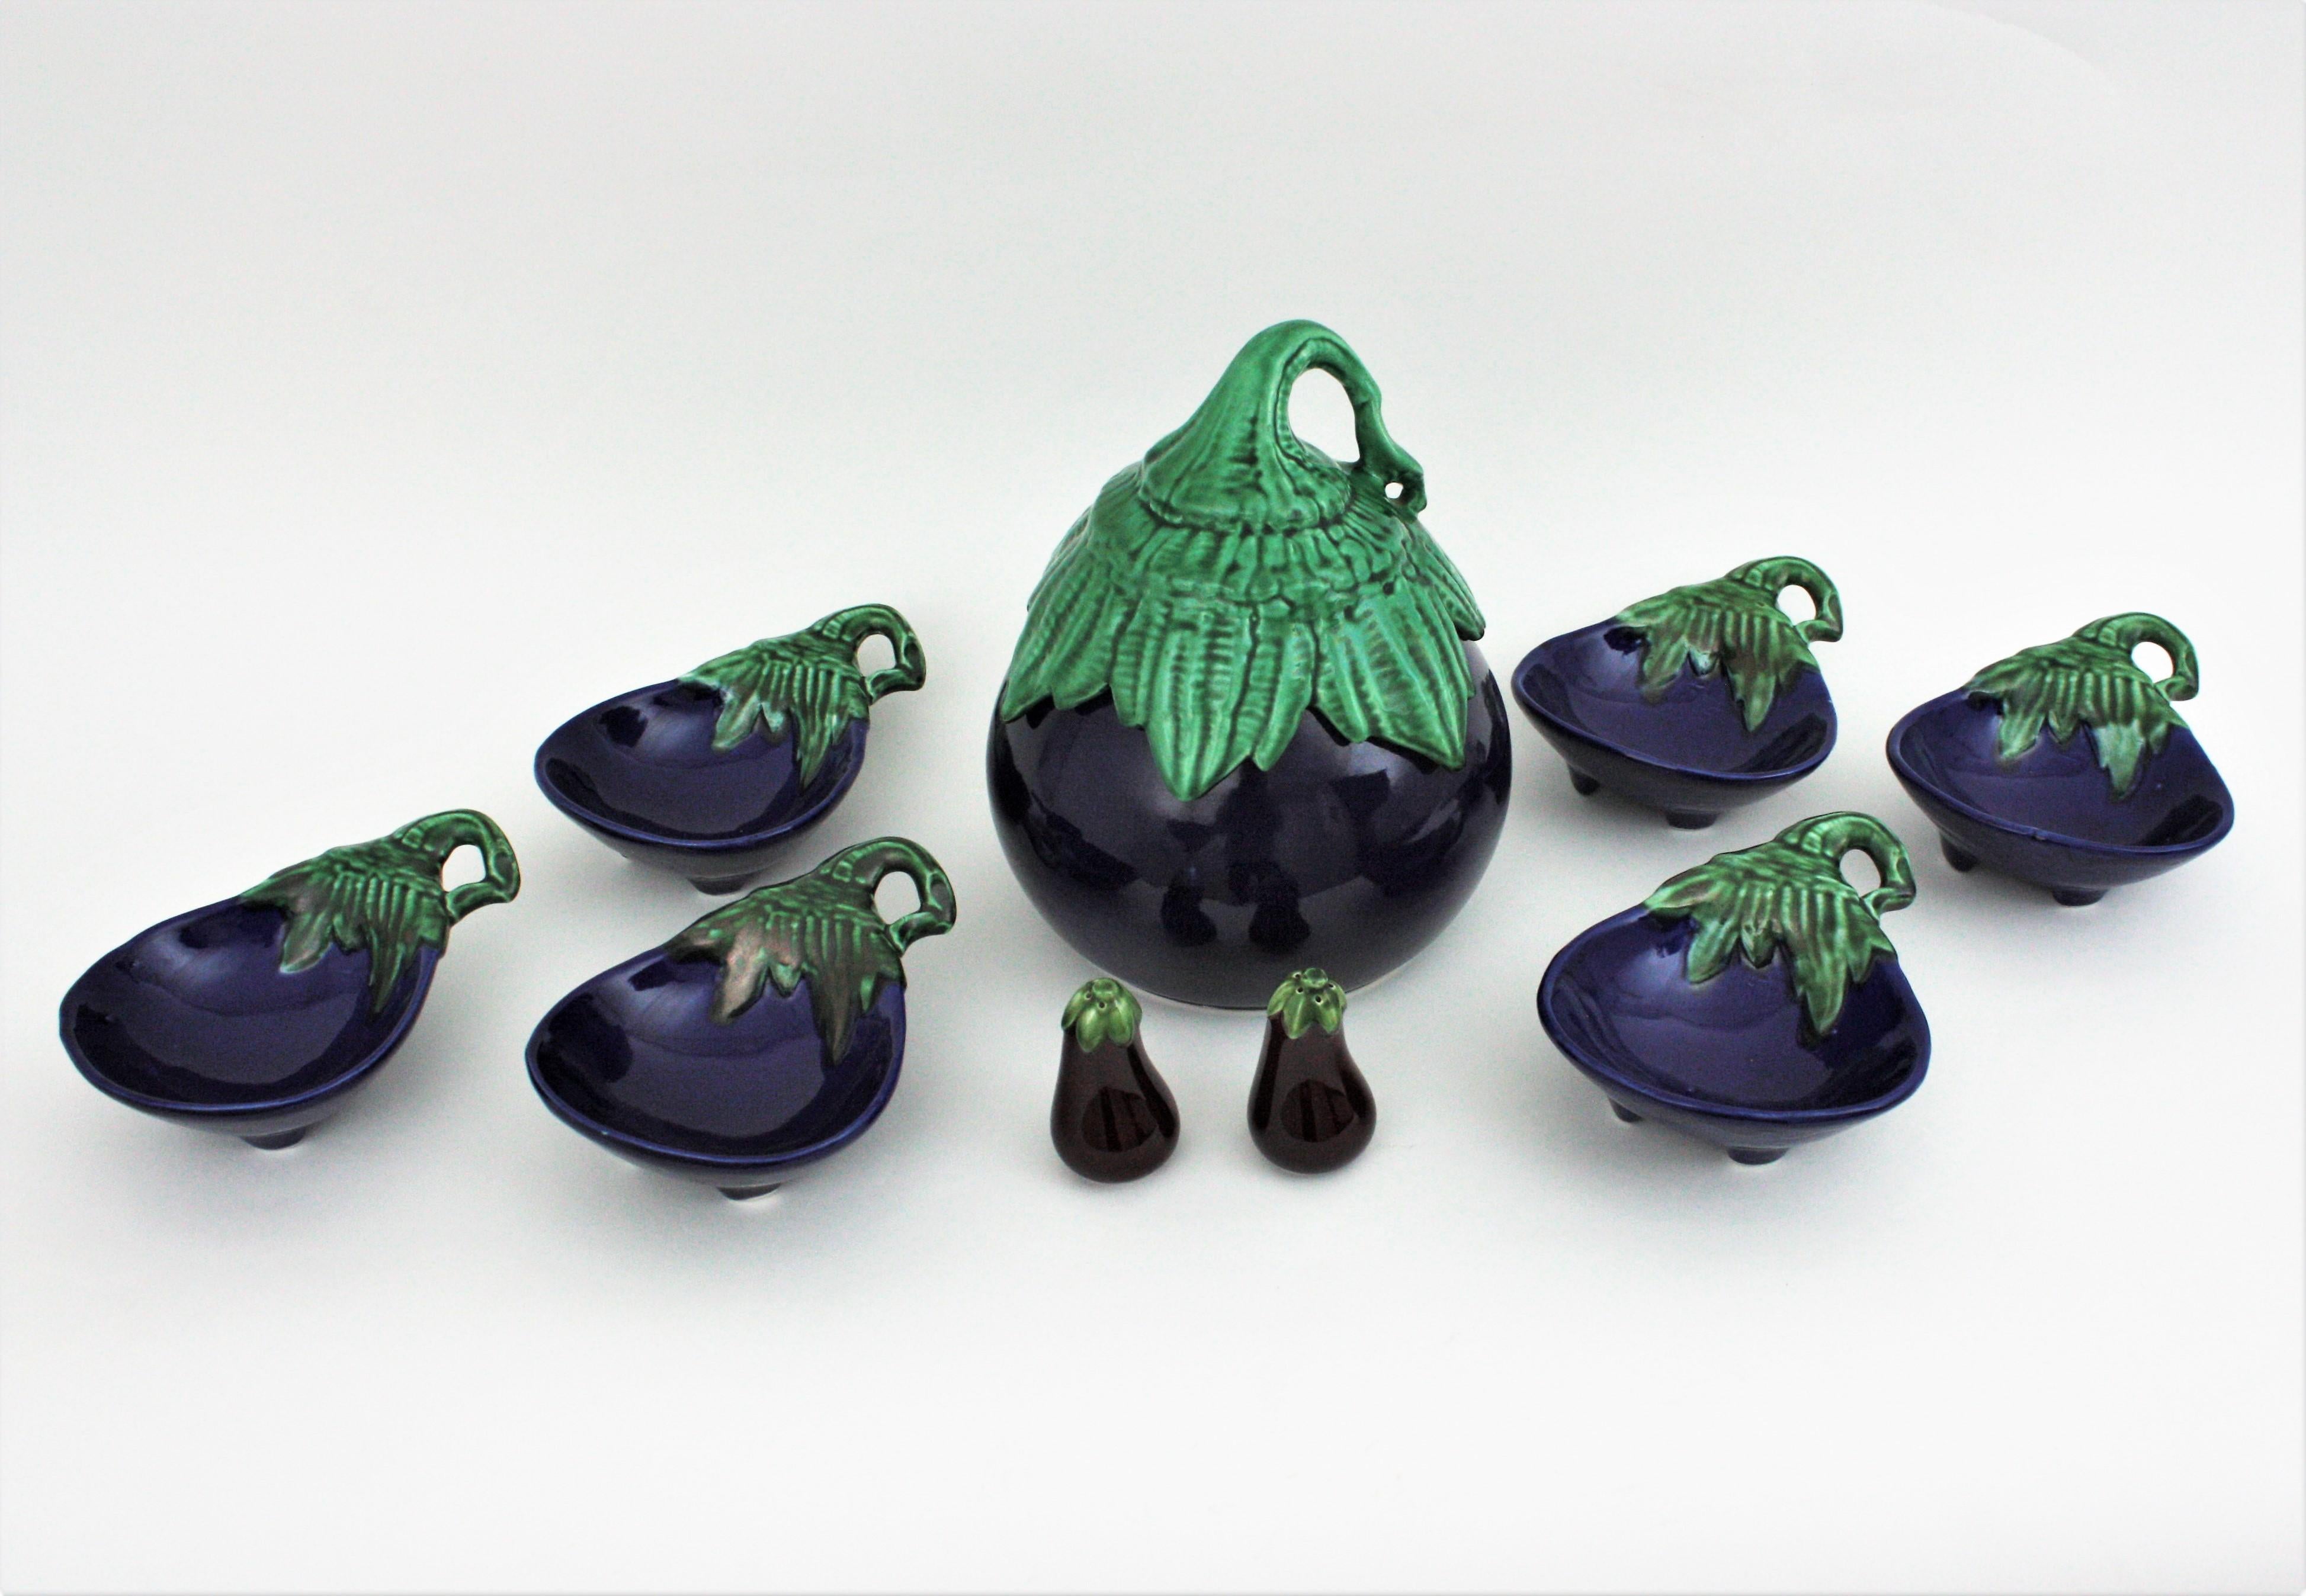 Tableware serving set eggplant design. Italy, 1960s.
One of a kind majolica ceramic tableware set of pieces. The set is comprised by:
1 large eggplant tureen centerpiece
6 aubergine glazed ceramic appetizer or snacks bowls or dishes
2 pepper and